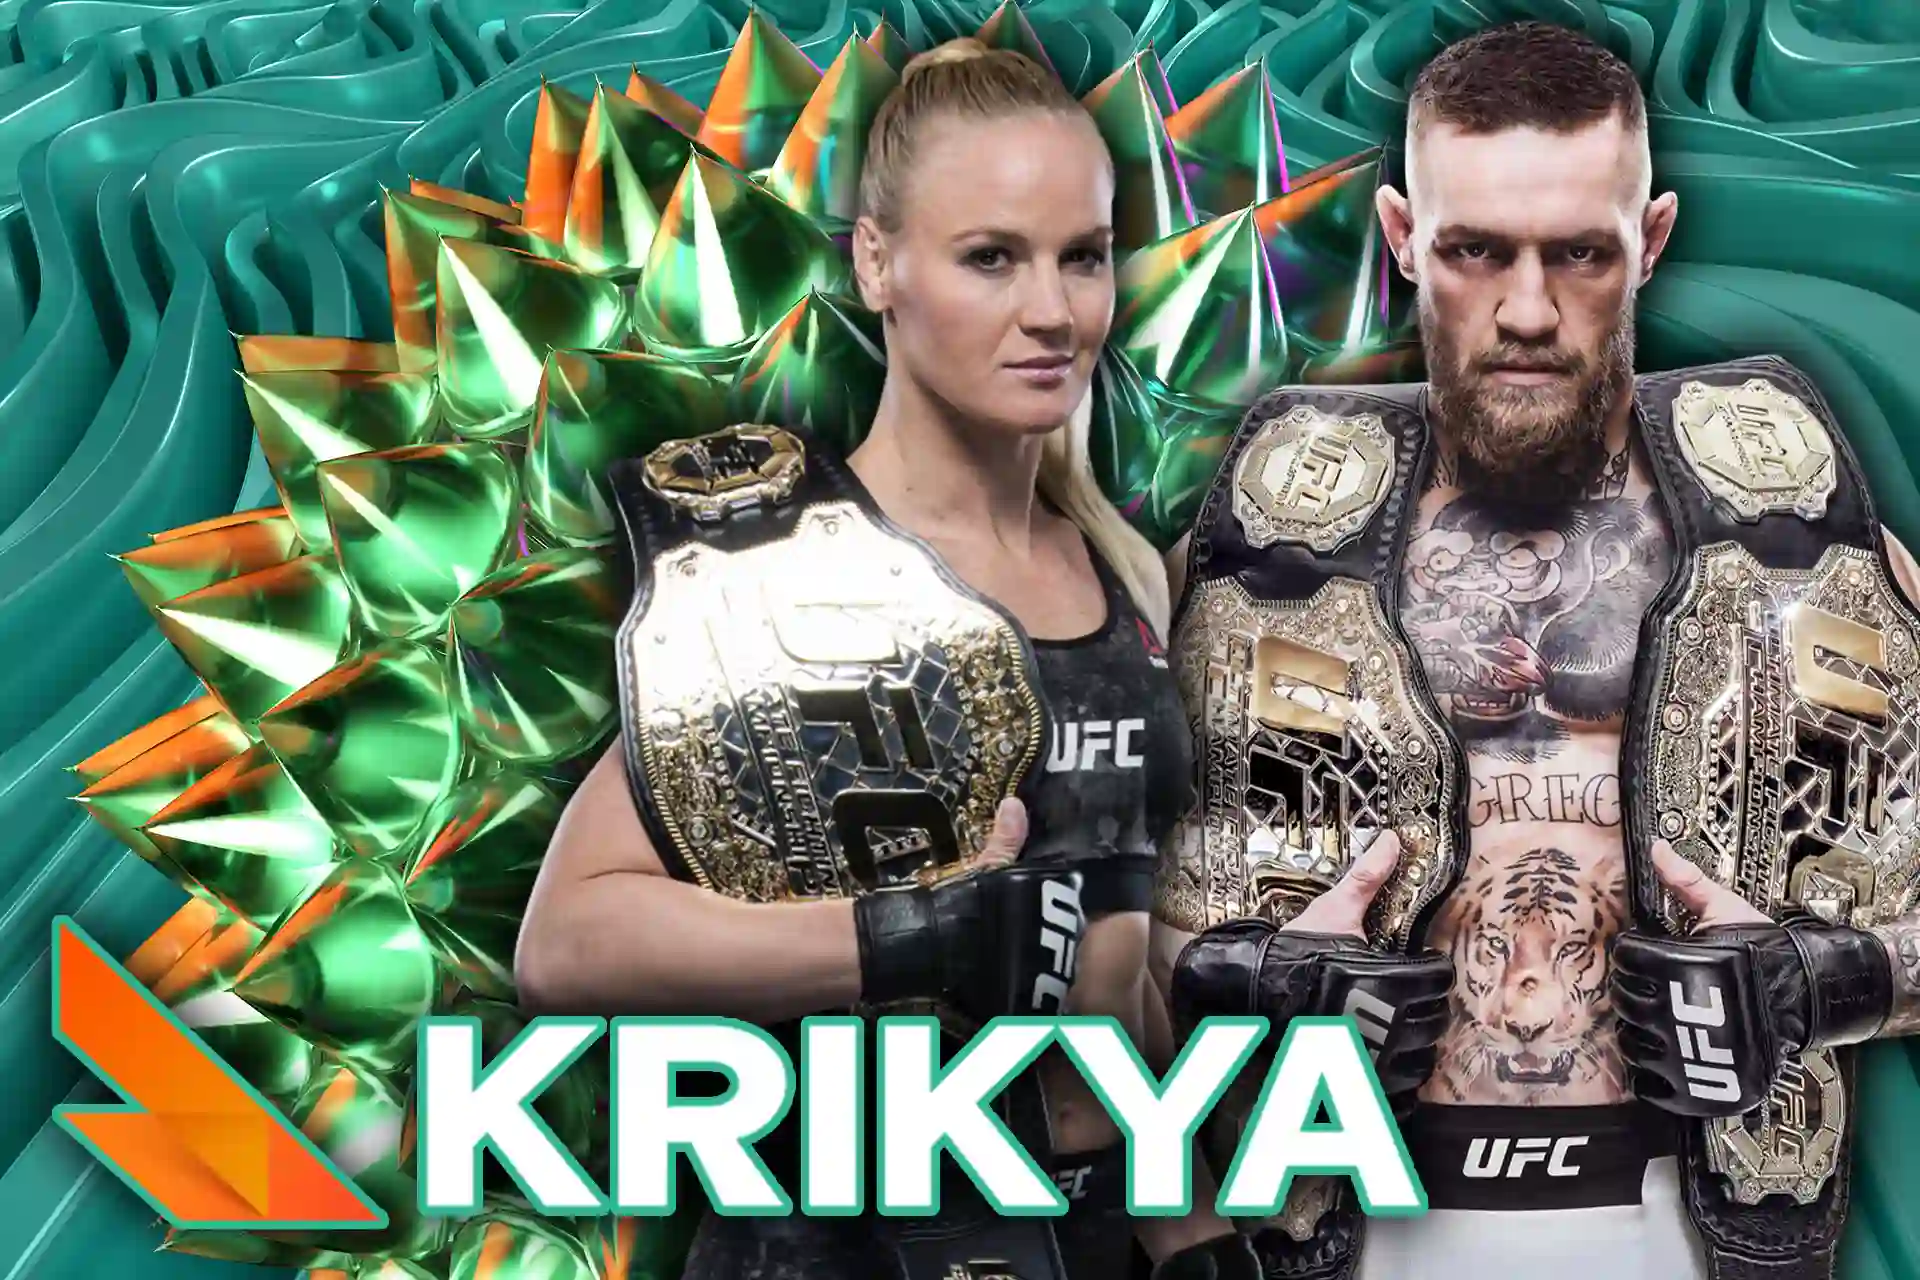 Place a bet on your preferred UFC fighter in the Krikya sportsbook.